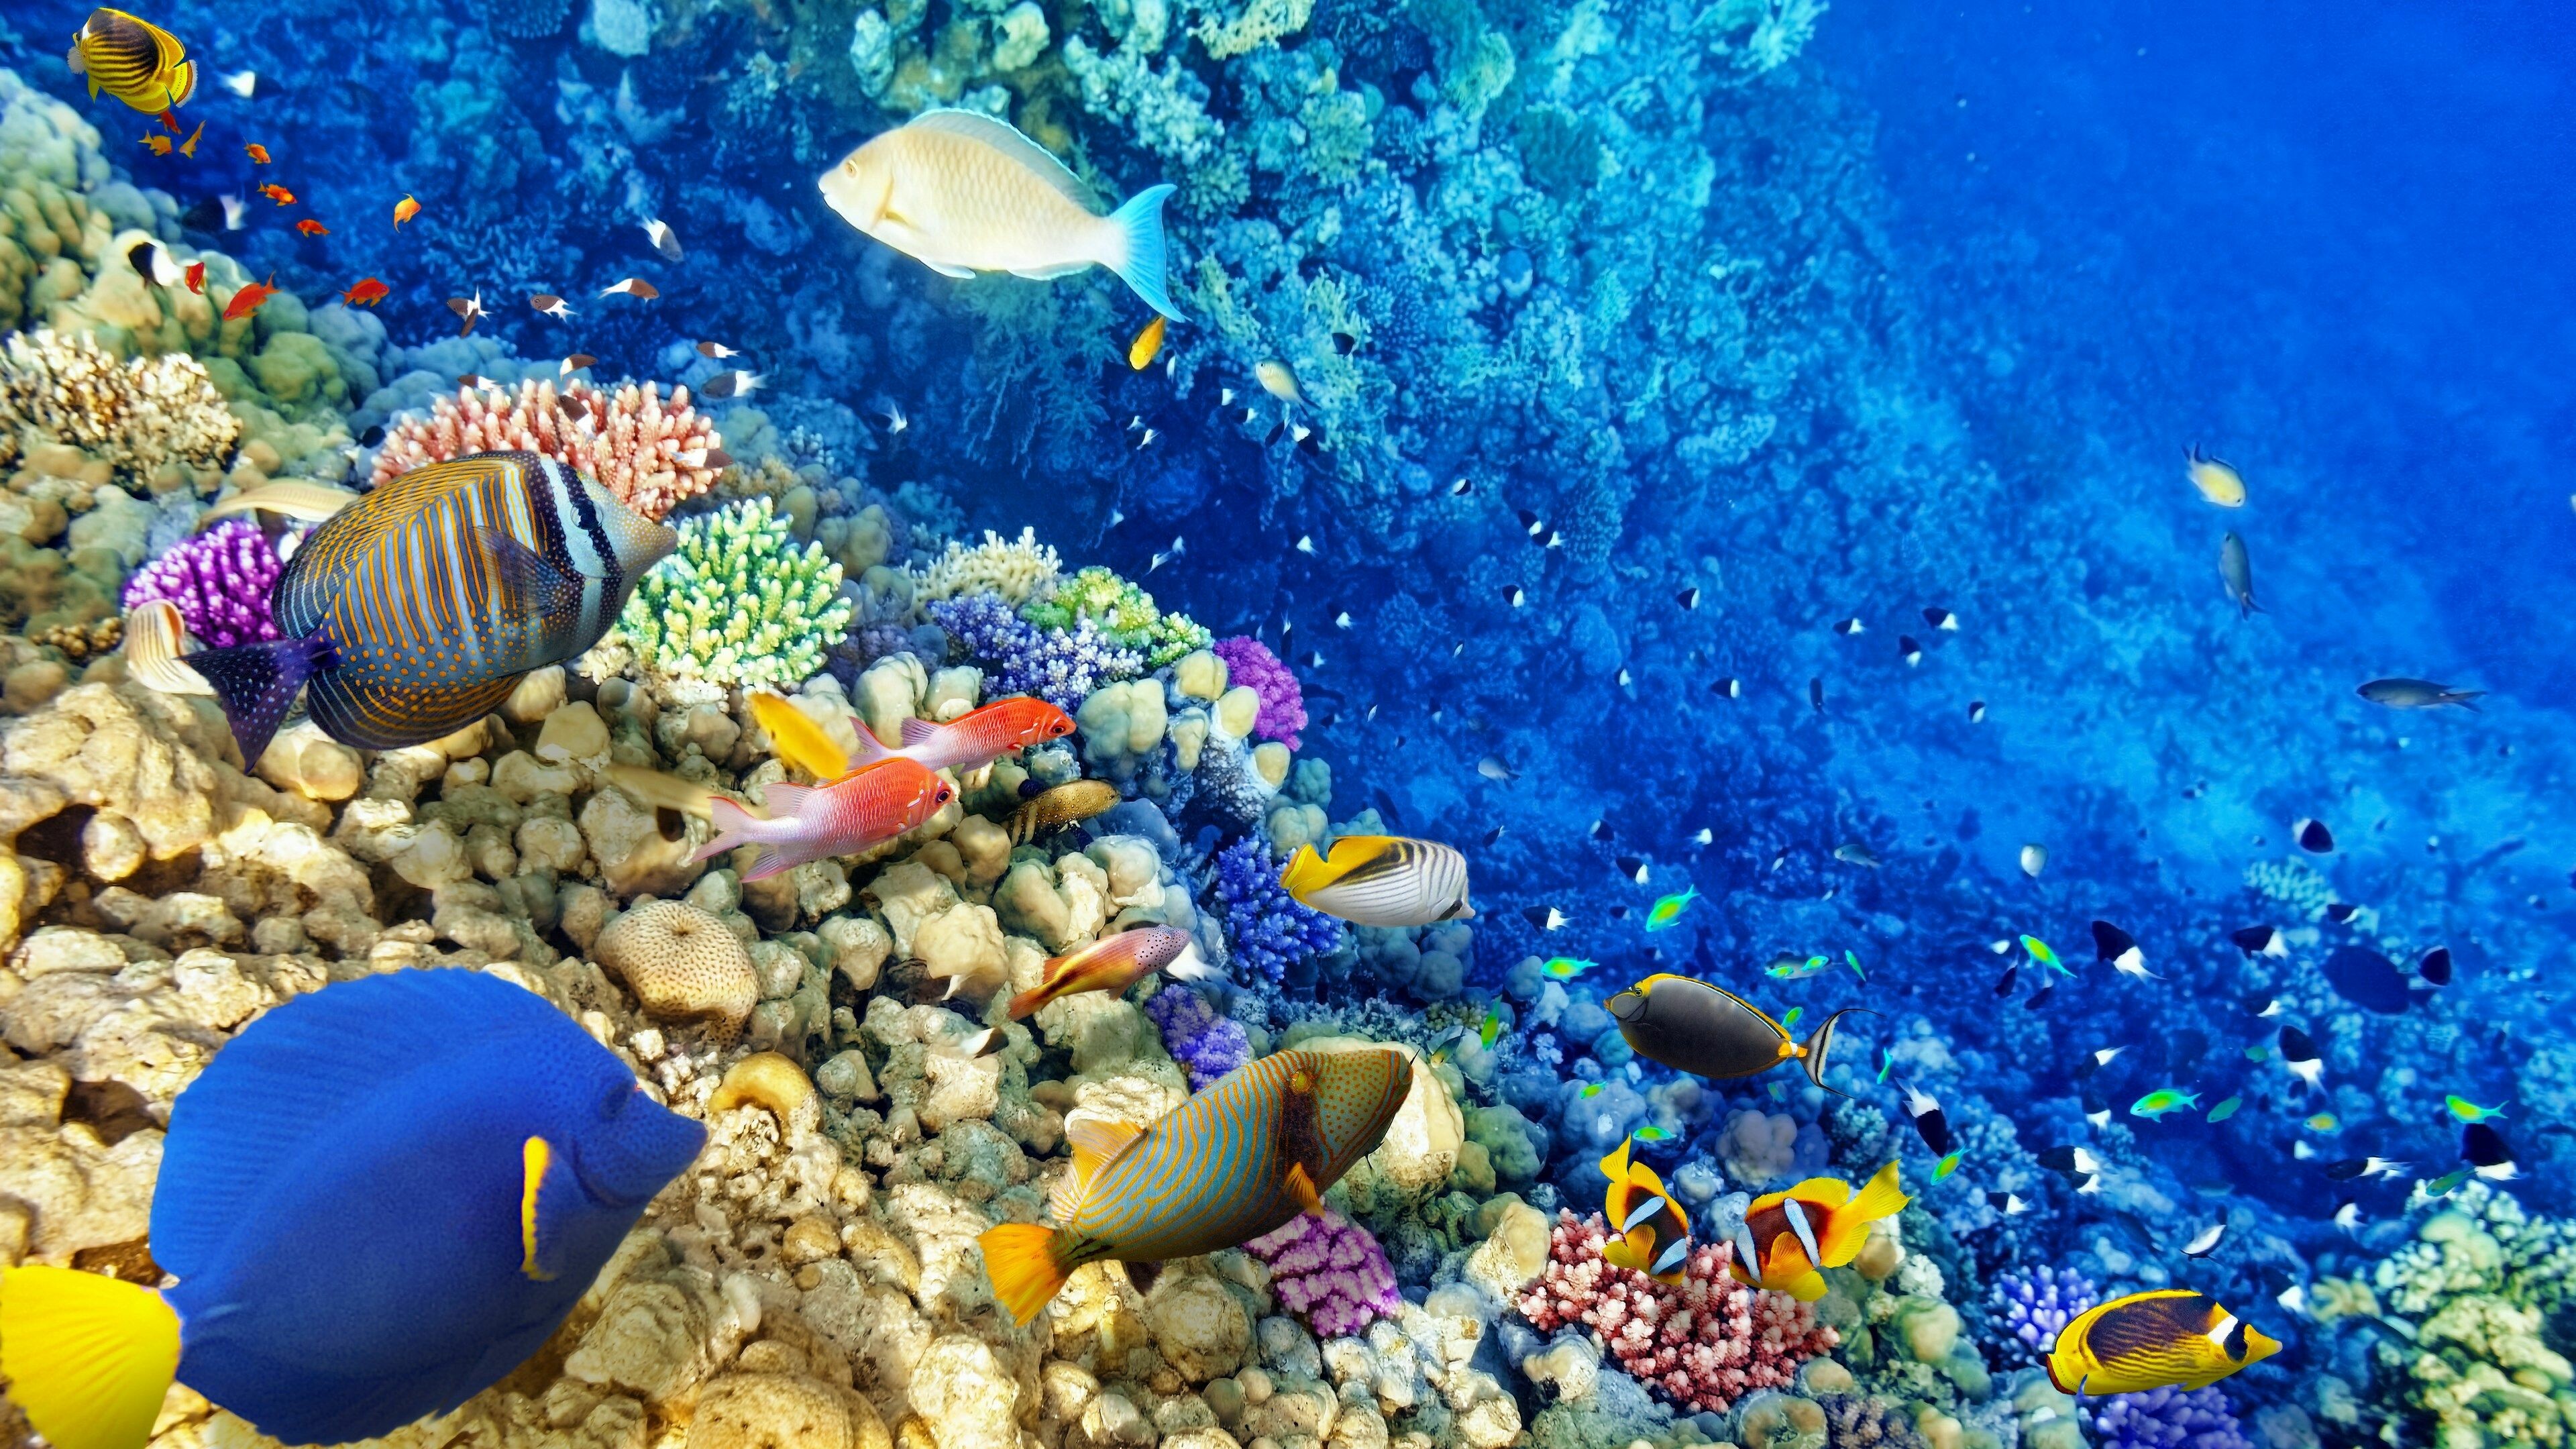 Coral Reef: An underwater ecosystem characterized by reef-building corals. 3840x2160 4K Background.